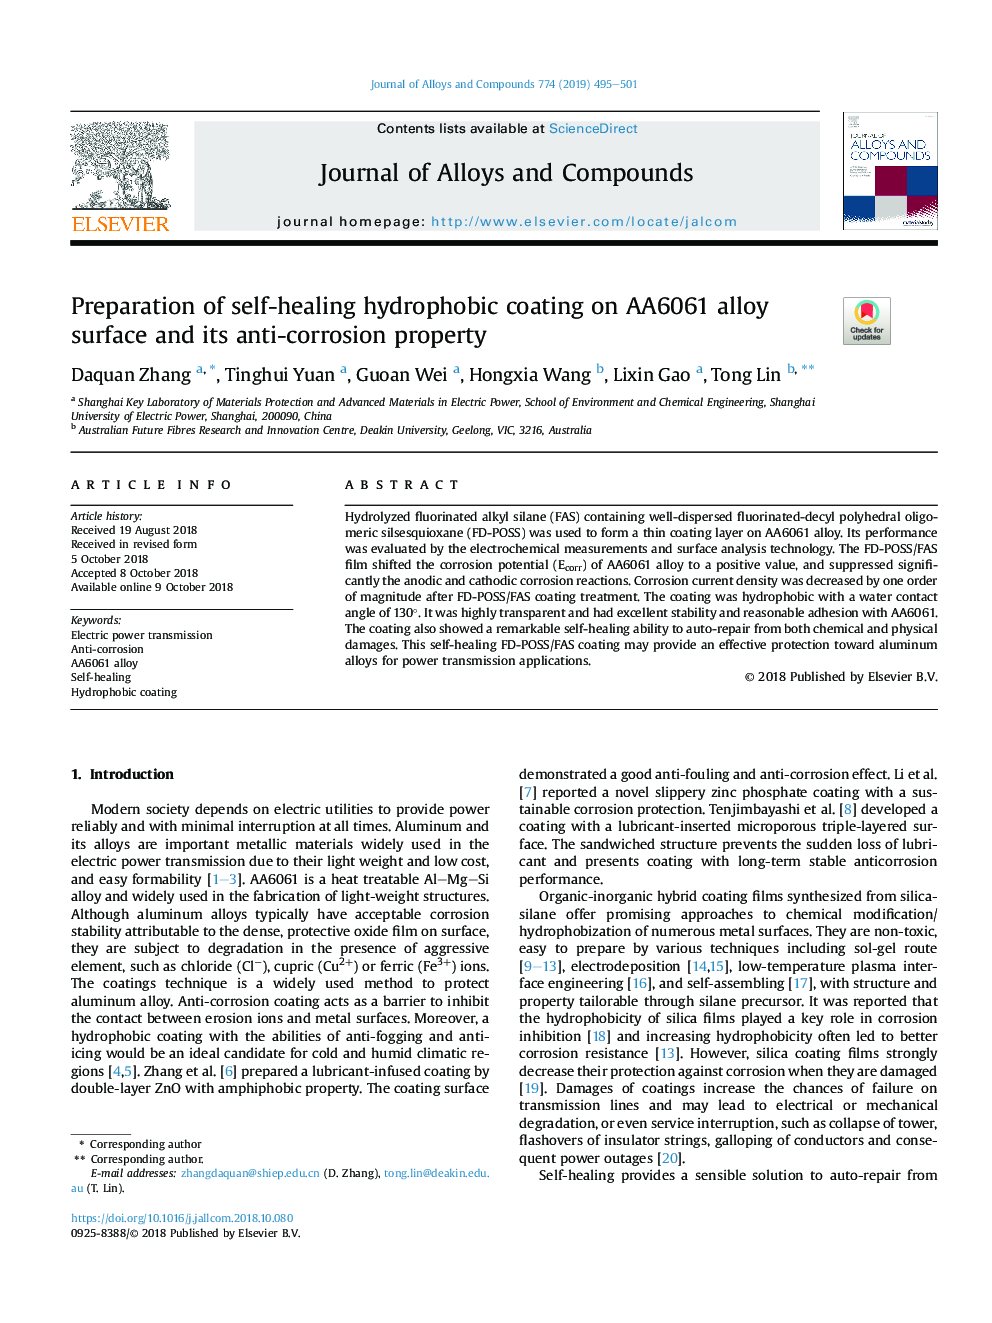 Preparation of self-healing hydrophobic coating on AA6061 alloy surface and its anti-corrosion property